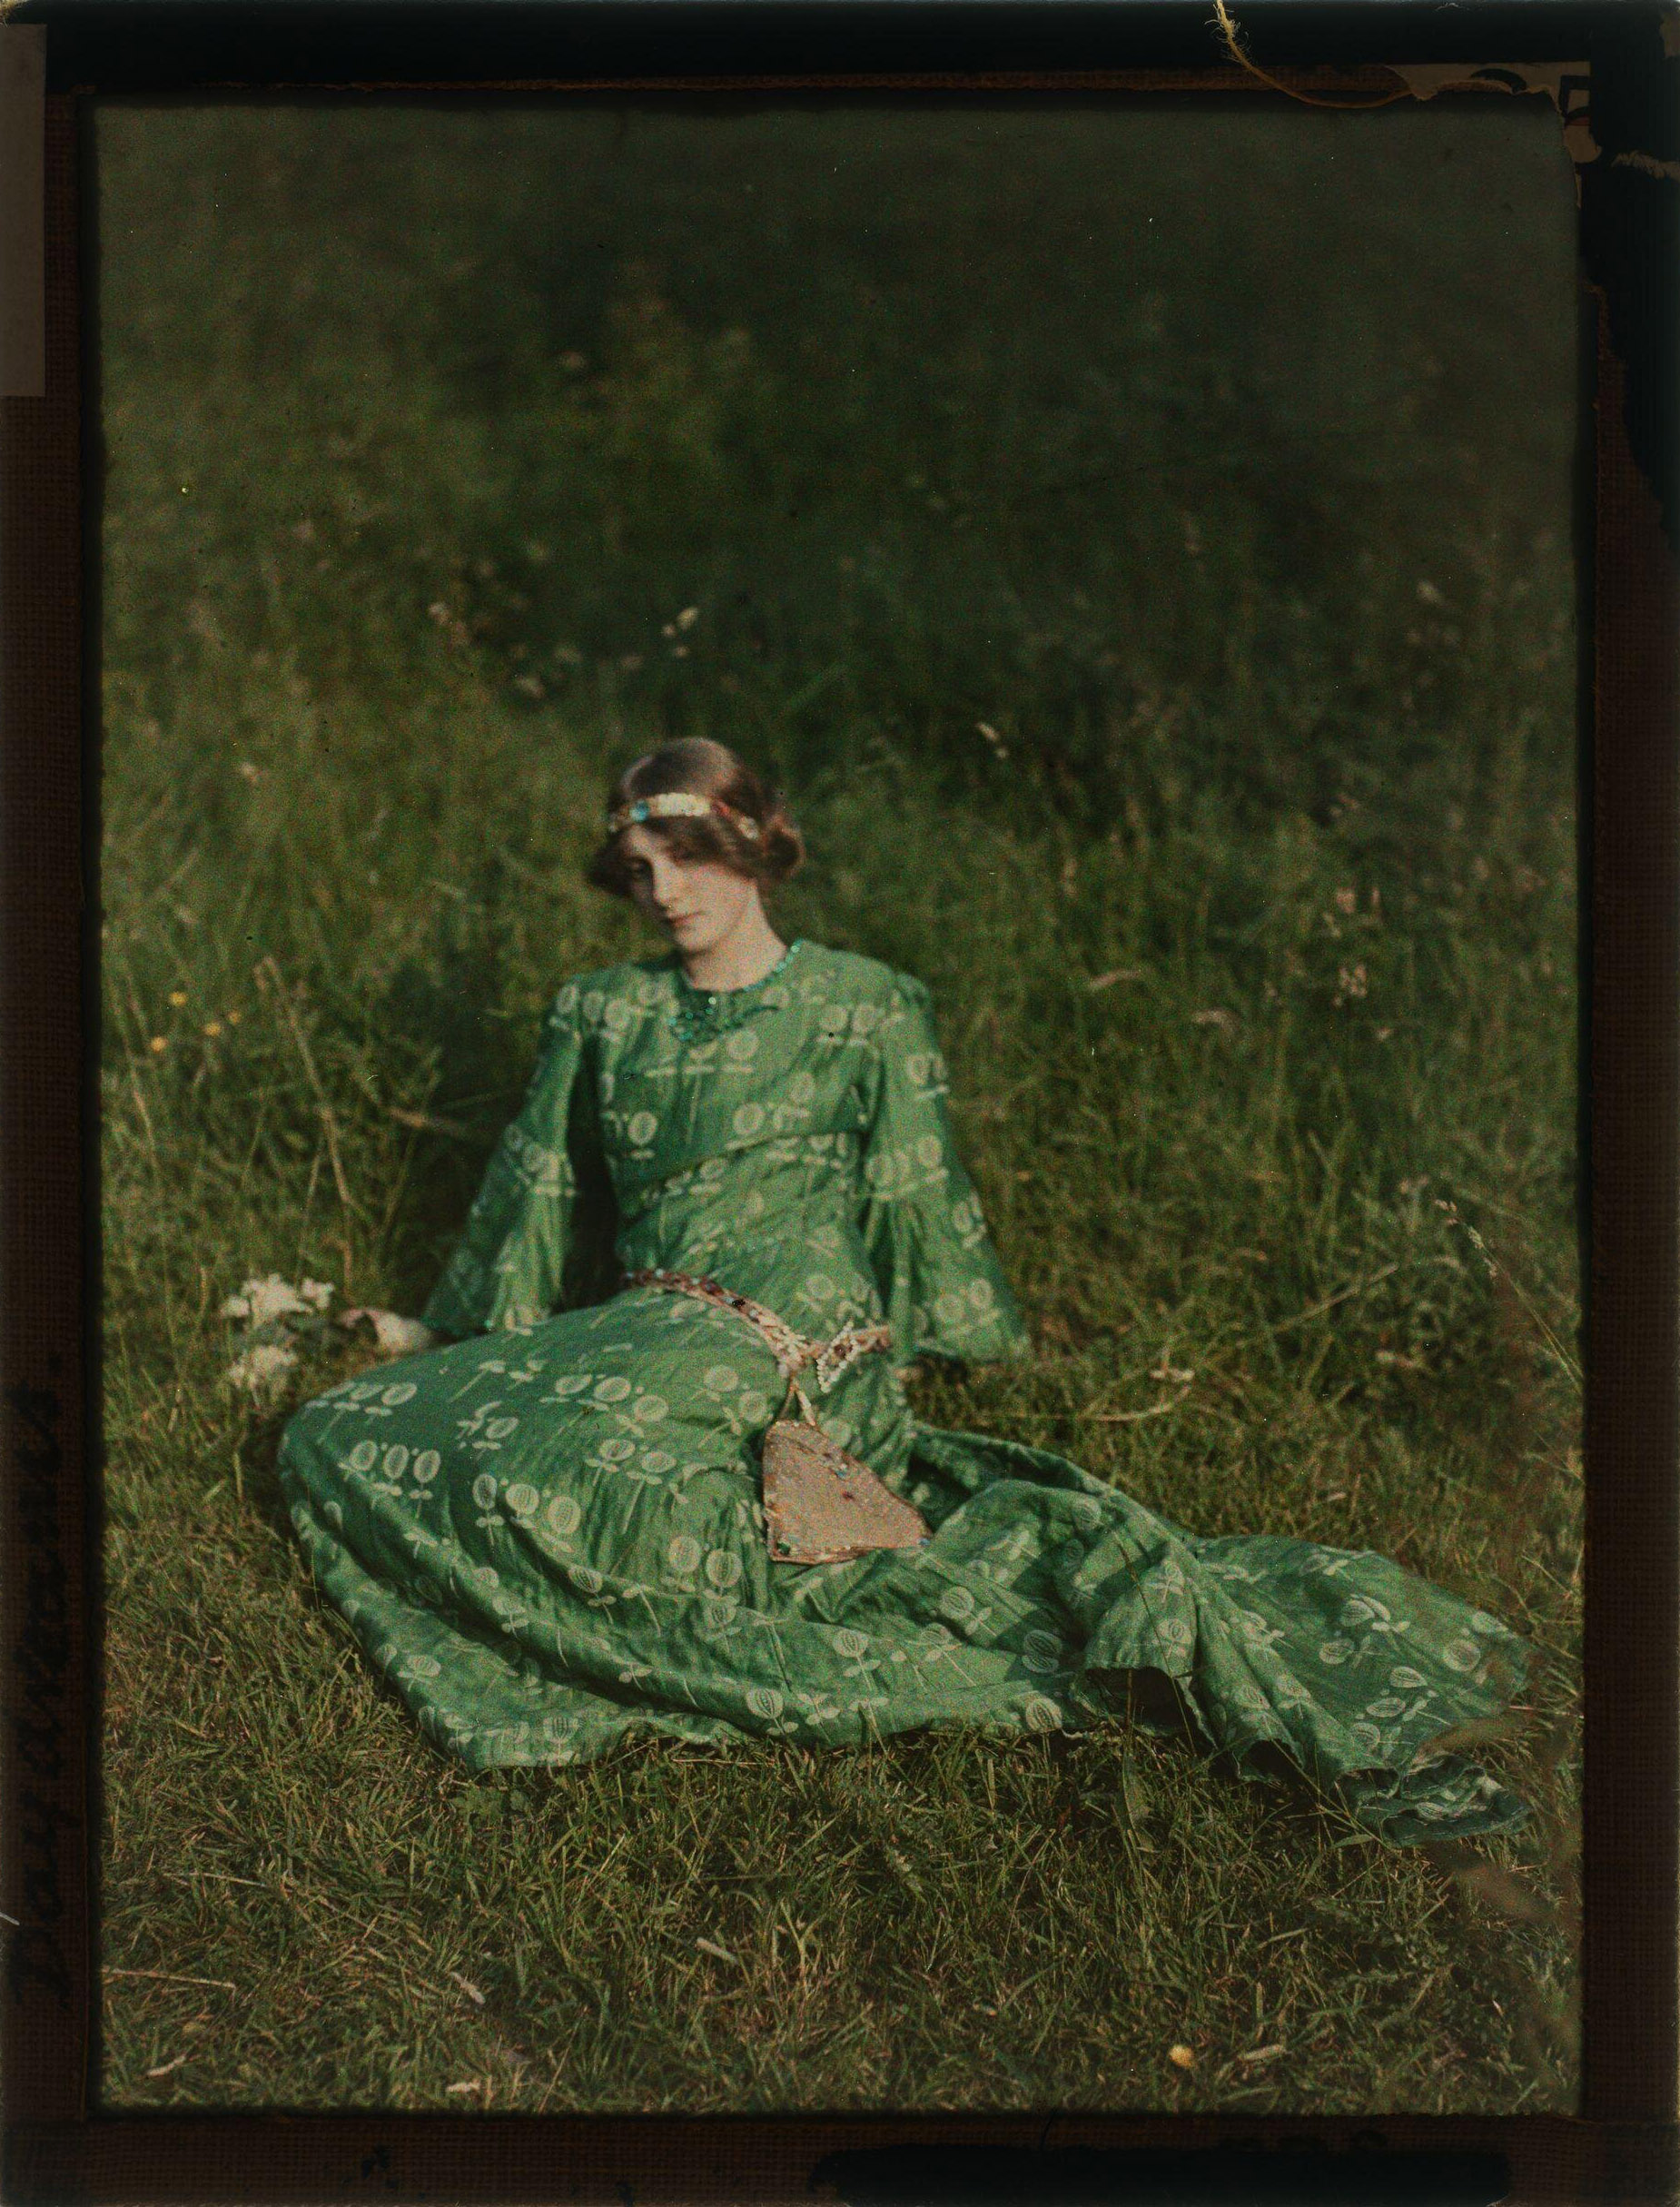 John Cimon Warburg :: 'Daydreams', 1909, autochrome. | src The Royal Photographic Society Collection at the V&A museum